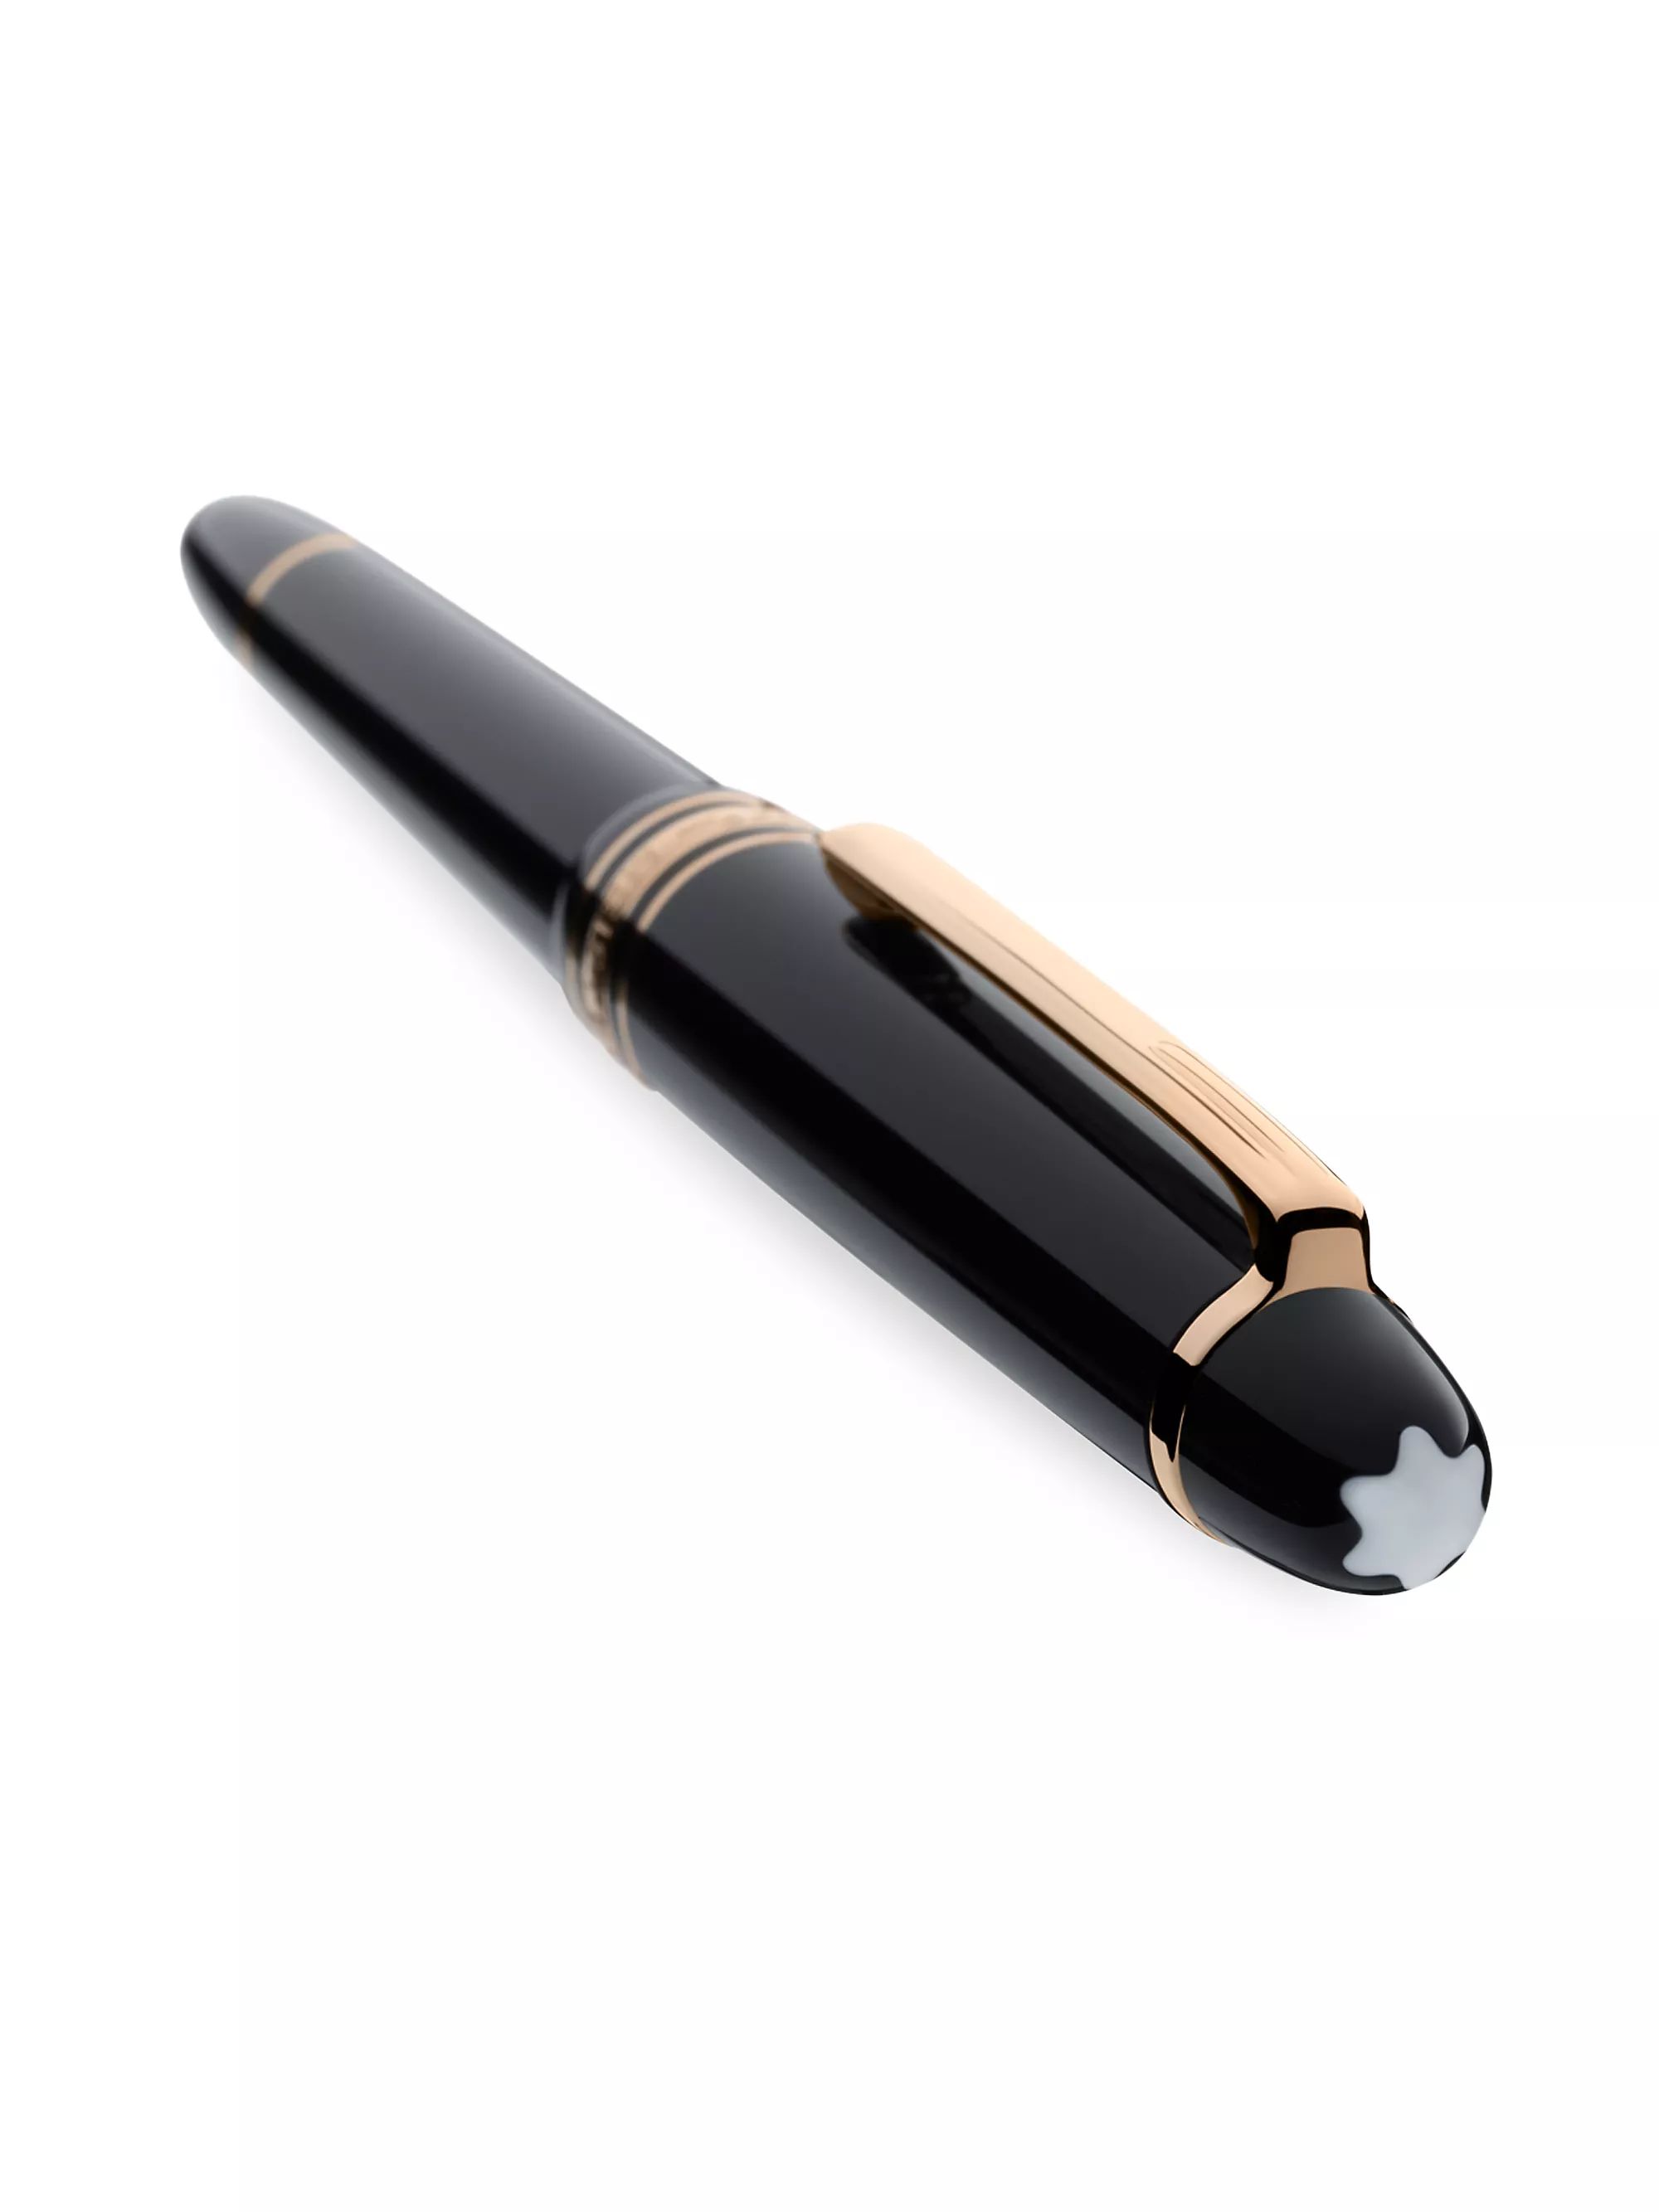 Meisterstück Red Gold-Coated Classique Rollerball Pen | Saks Fifth Avenue